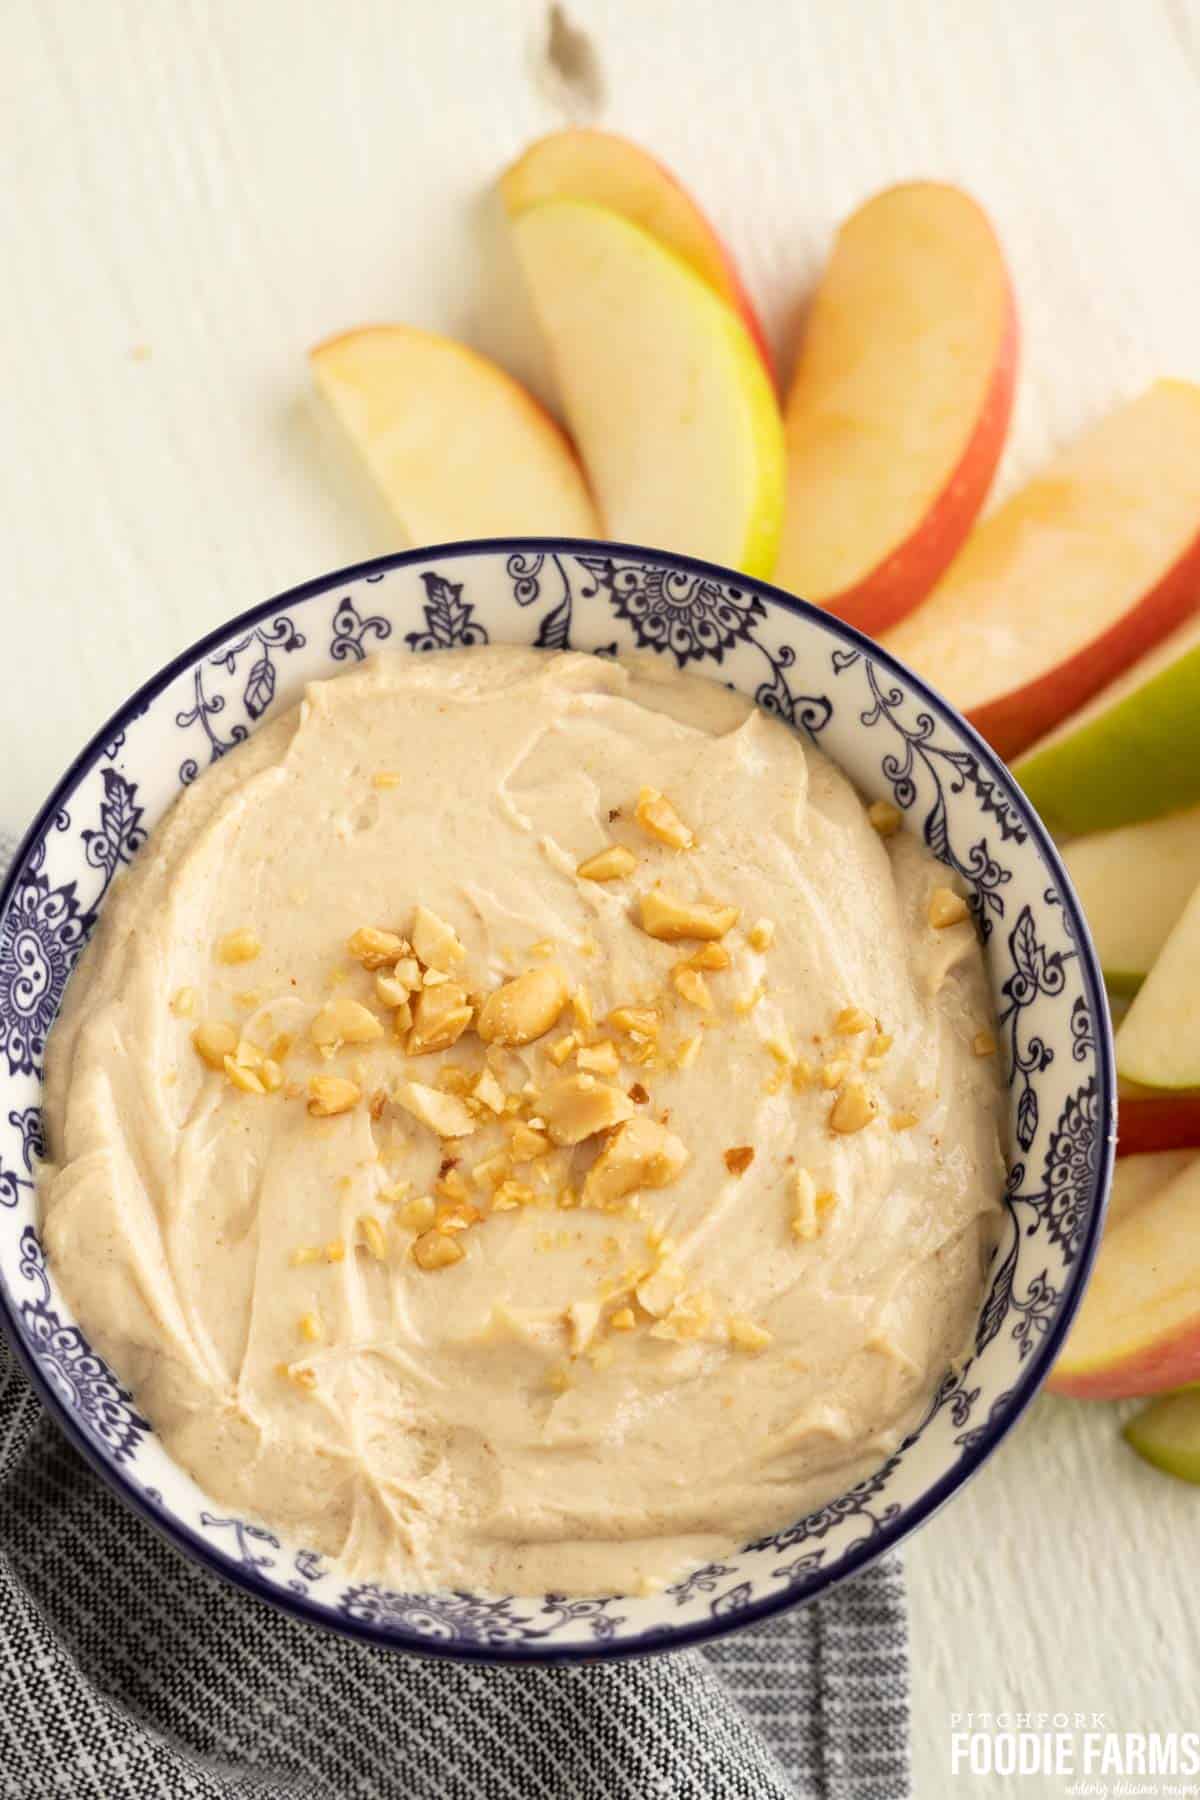 Peanut butter fruit dip in a bowl with sliced fresh apples.